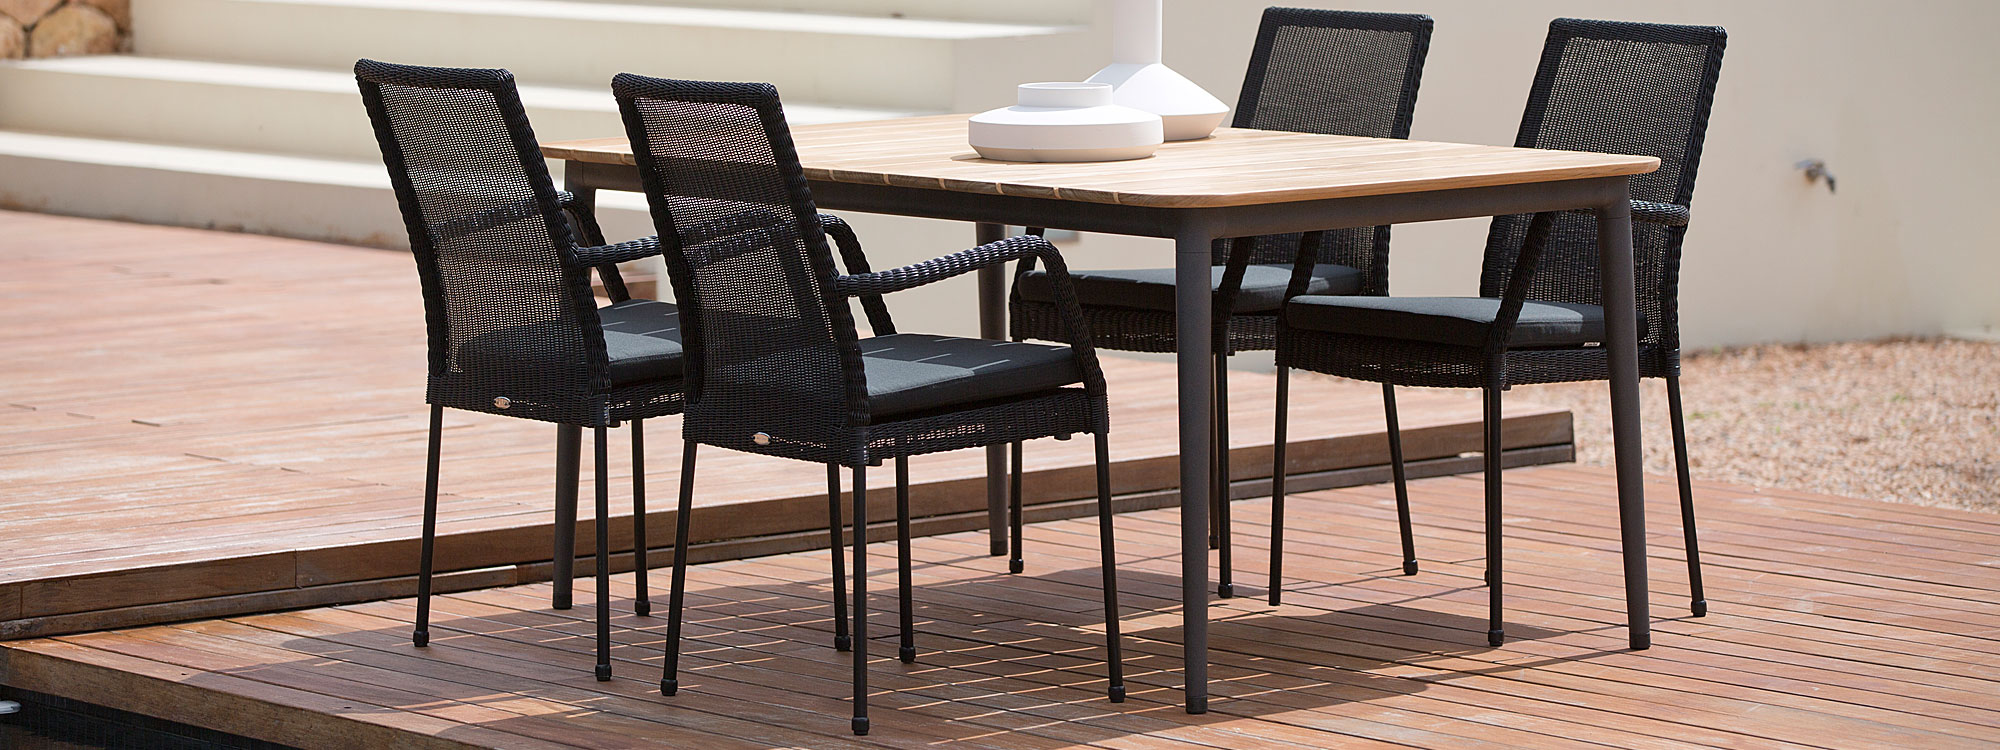 Newport garden chairs have timeless contemporary design and are made in high quality Cane-line Weave